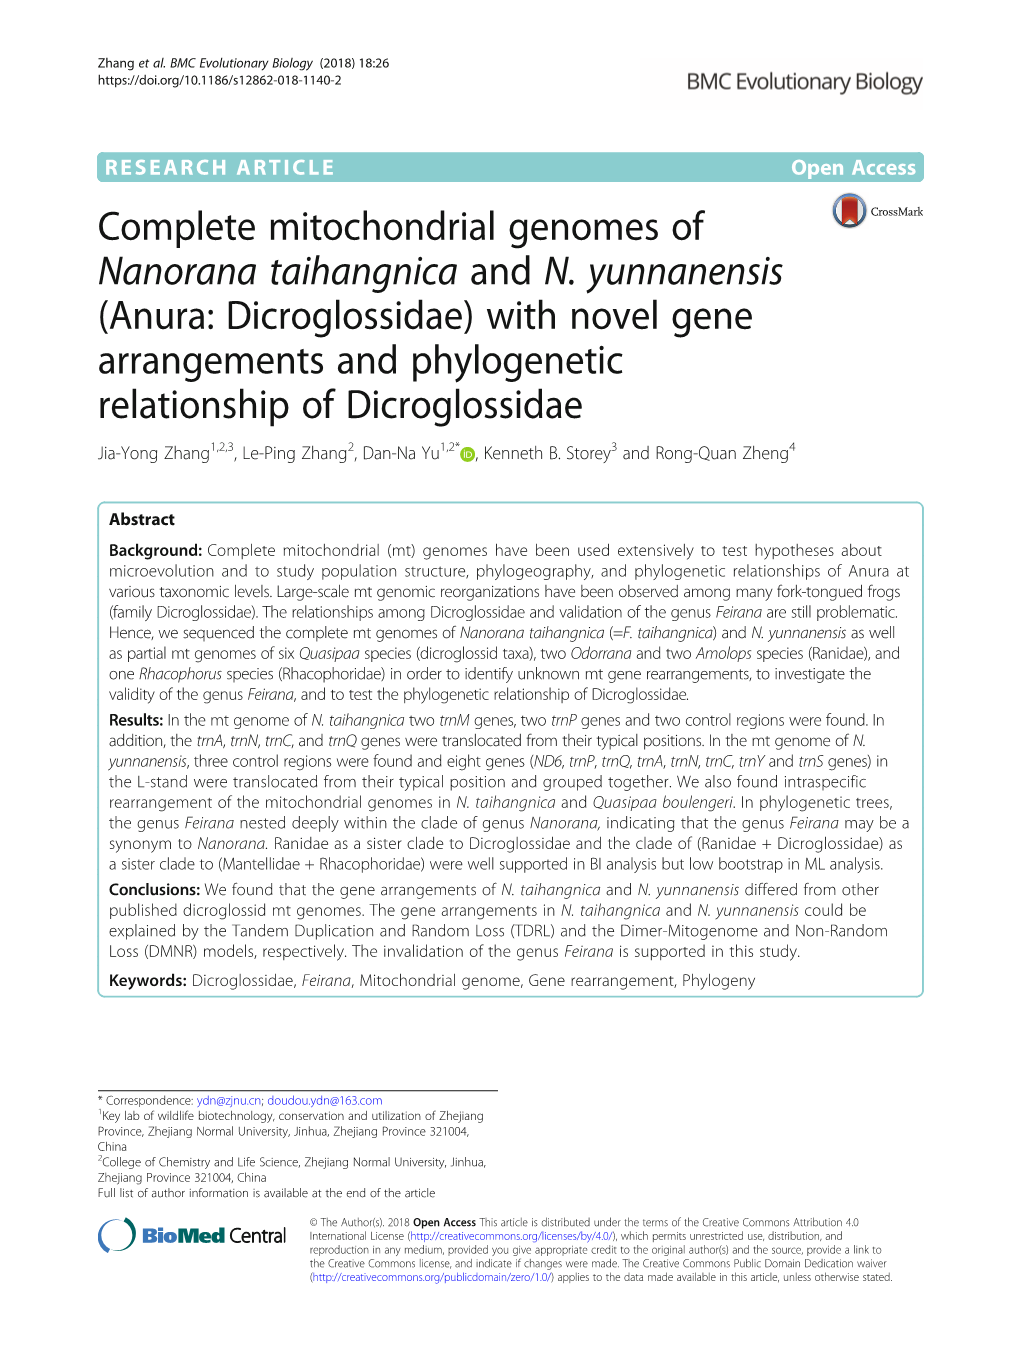 Complete Mitochondrial Genomes of Nanorana Taihangnica and N